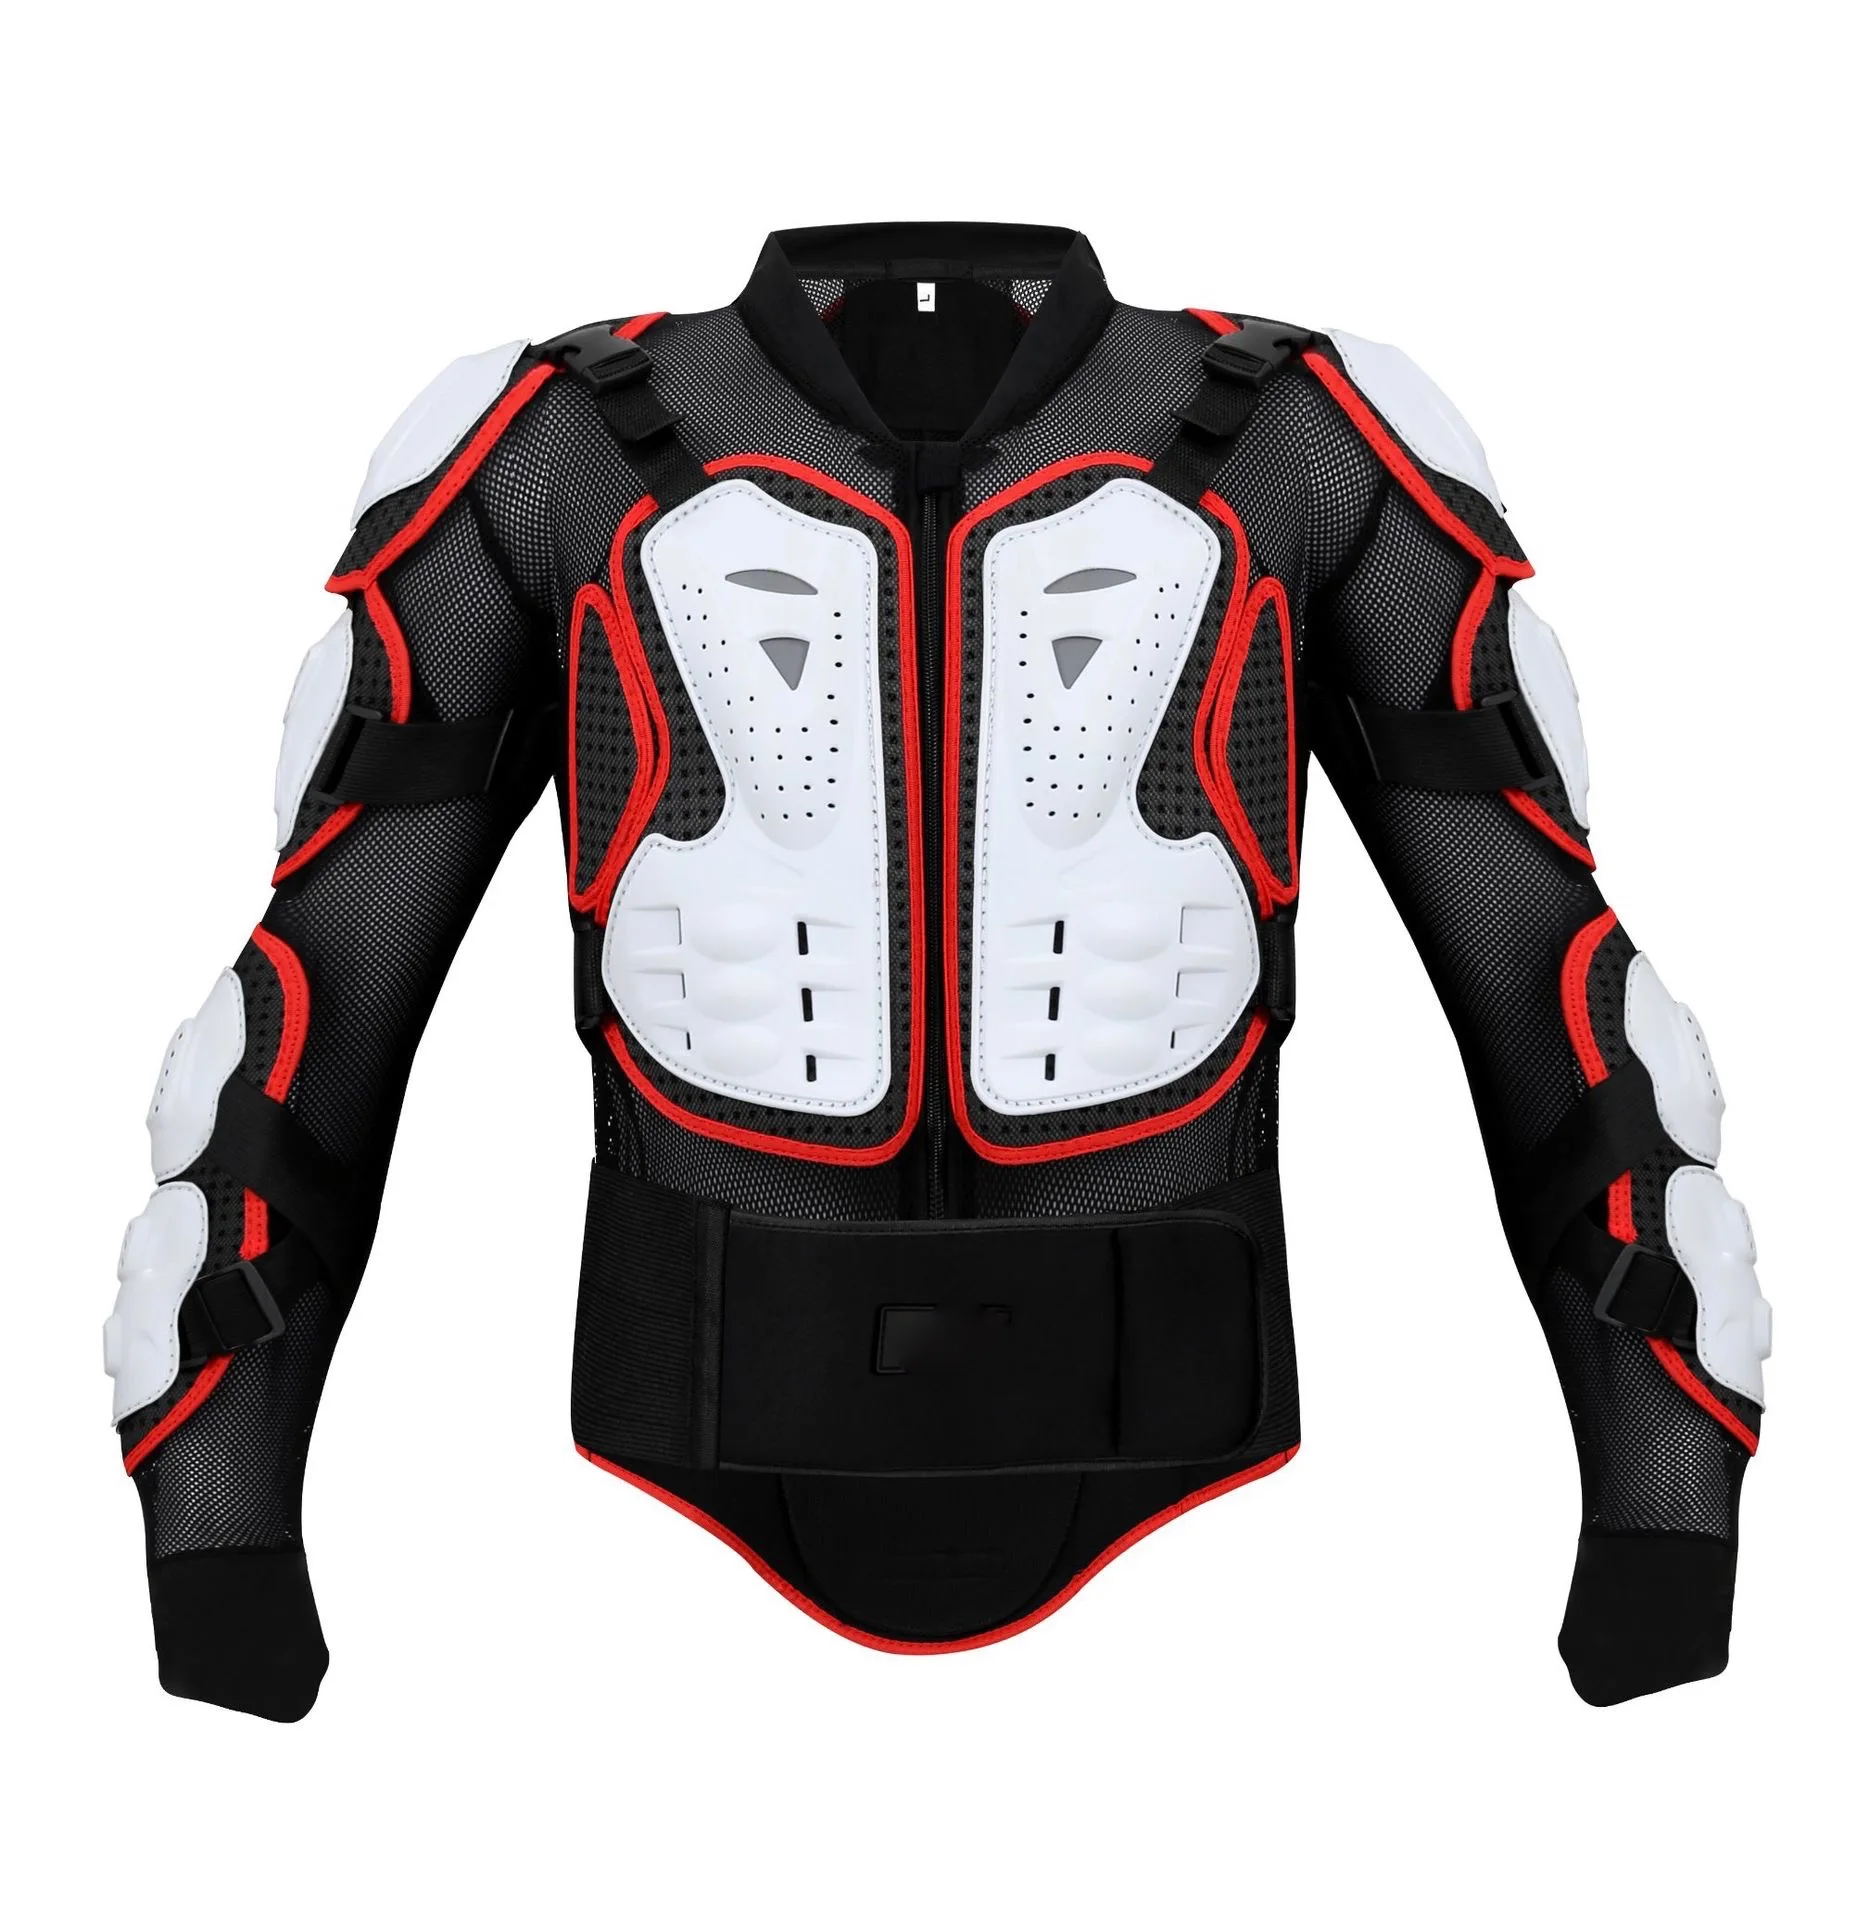 Motorcycle Motorcross Racing Full Body Armor Spine Chest Protector Jacket 